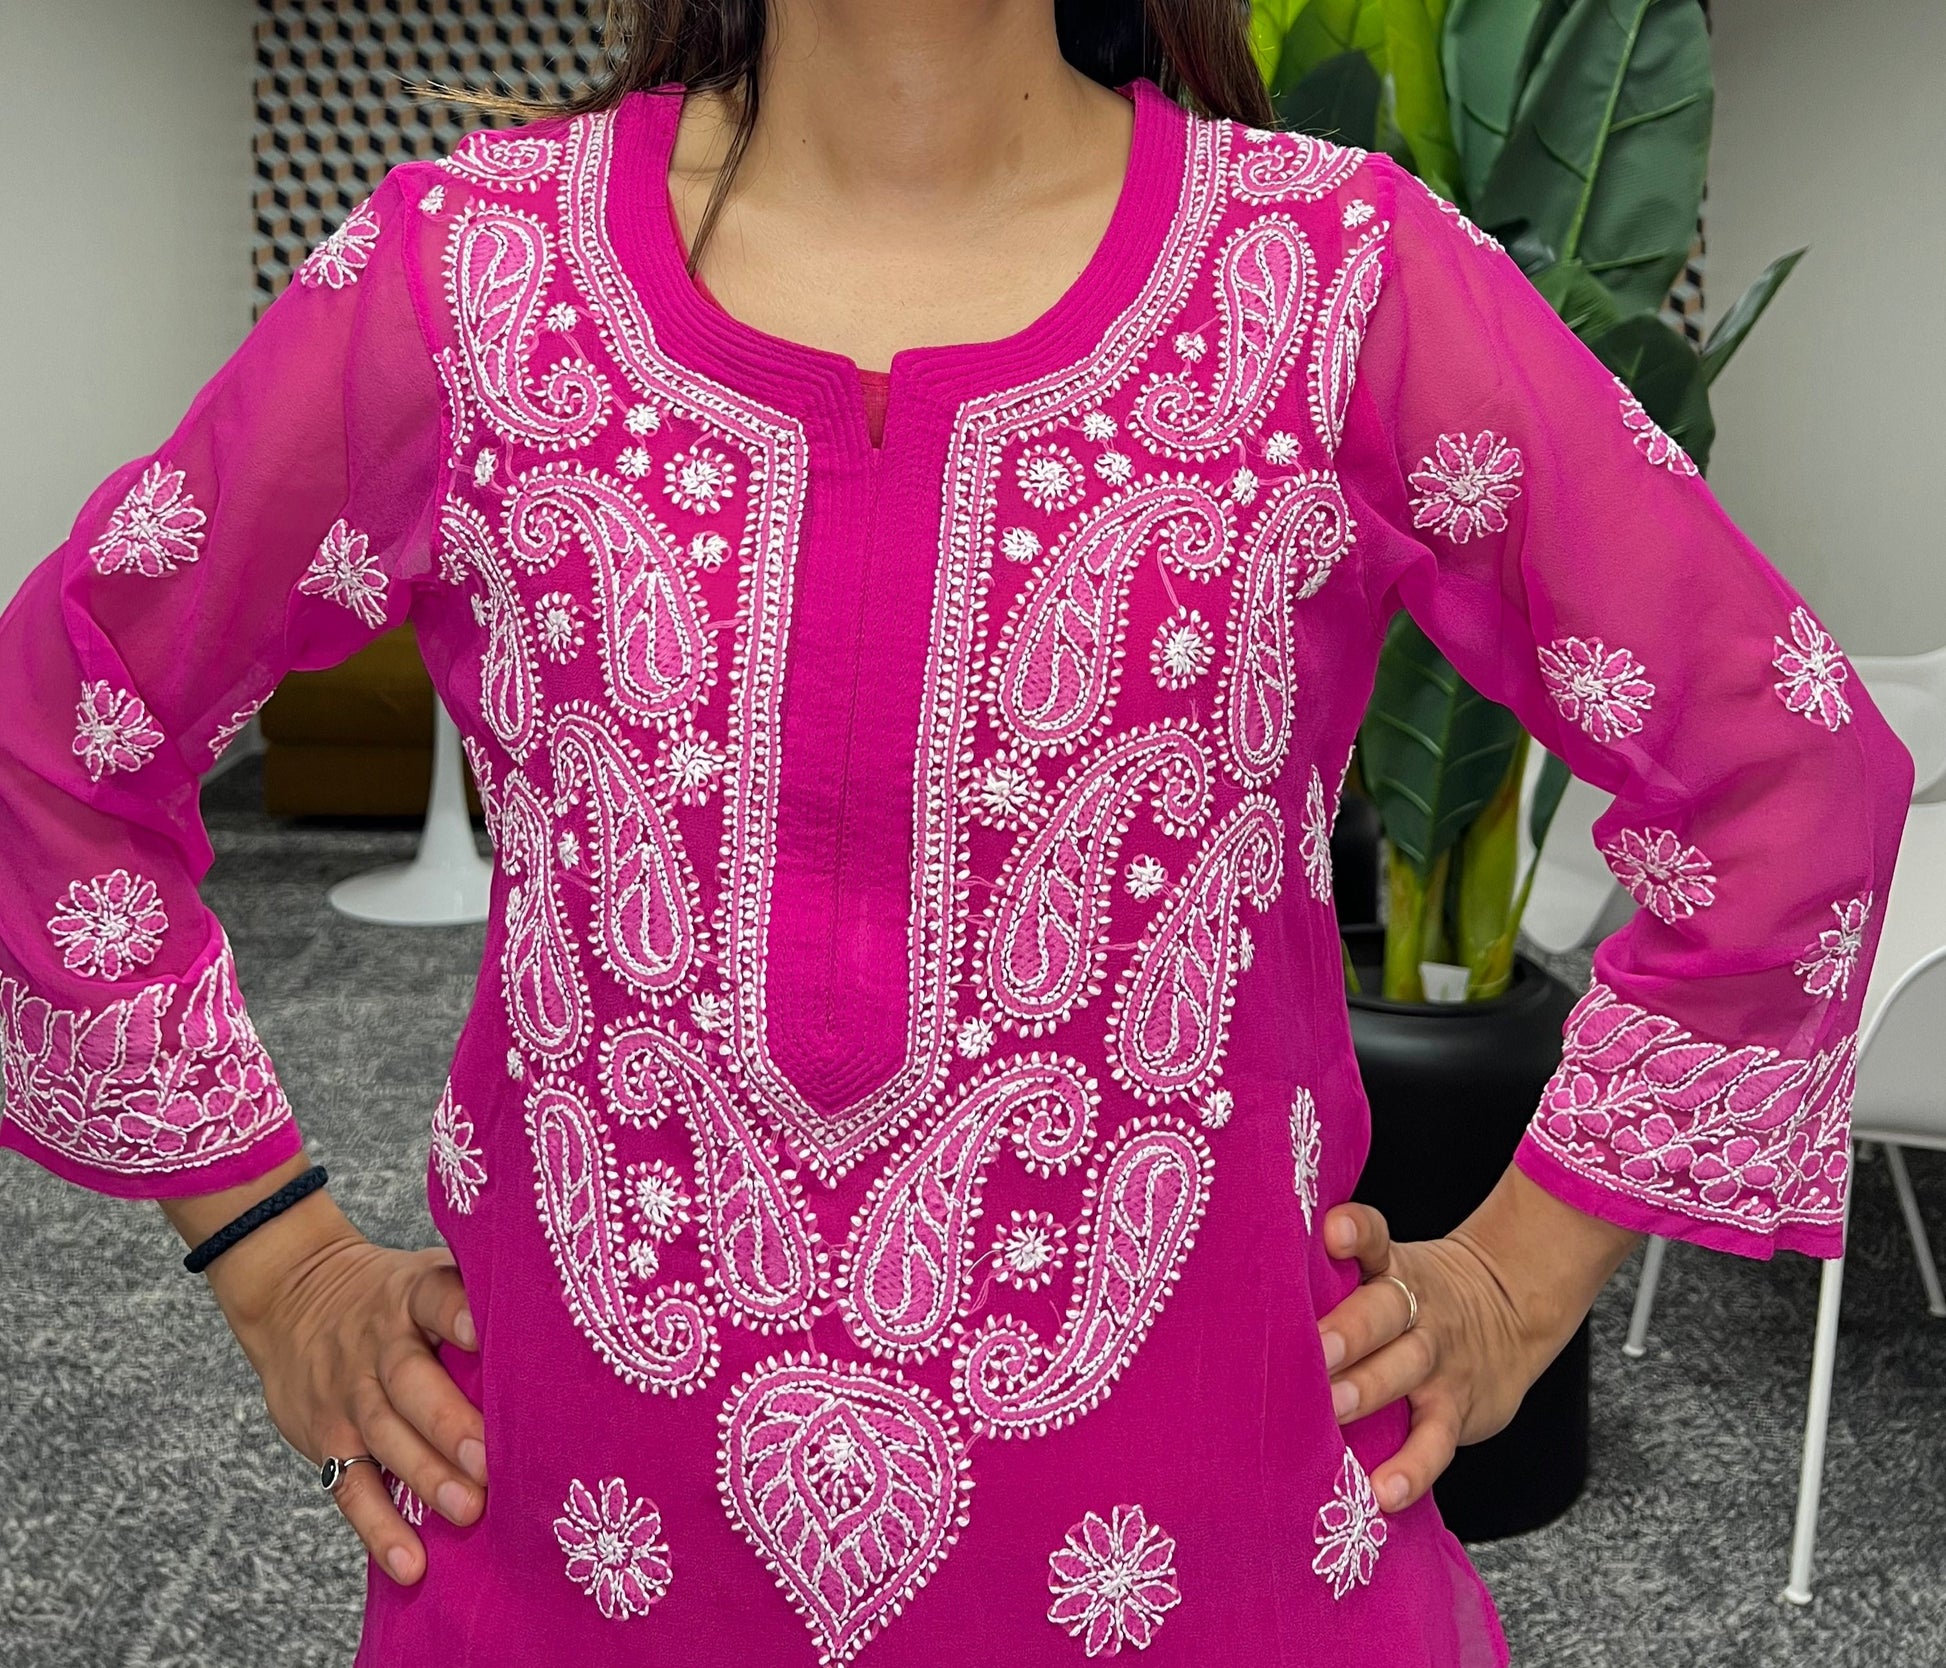 Detailed chikankari all over the neckline and chest area with white threads